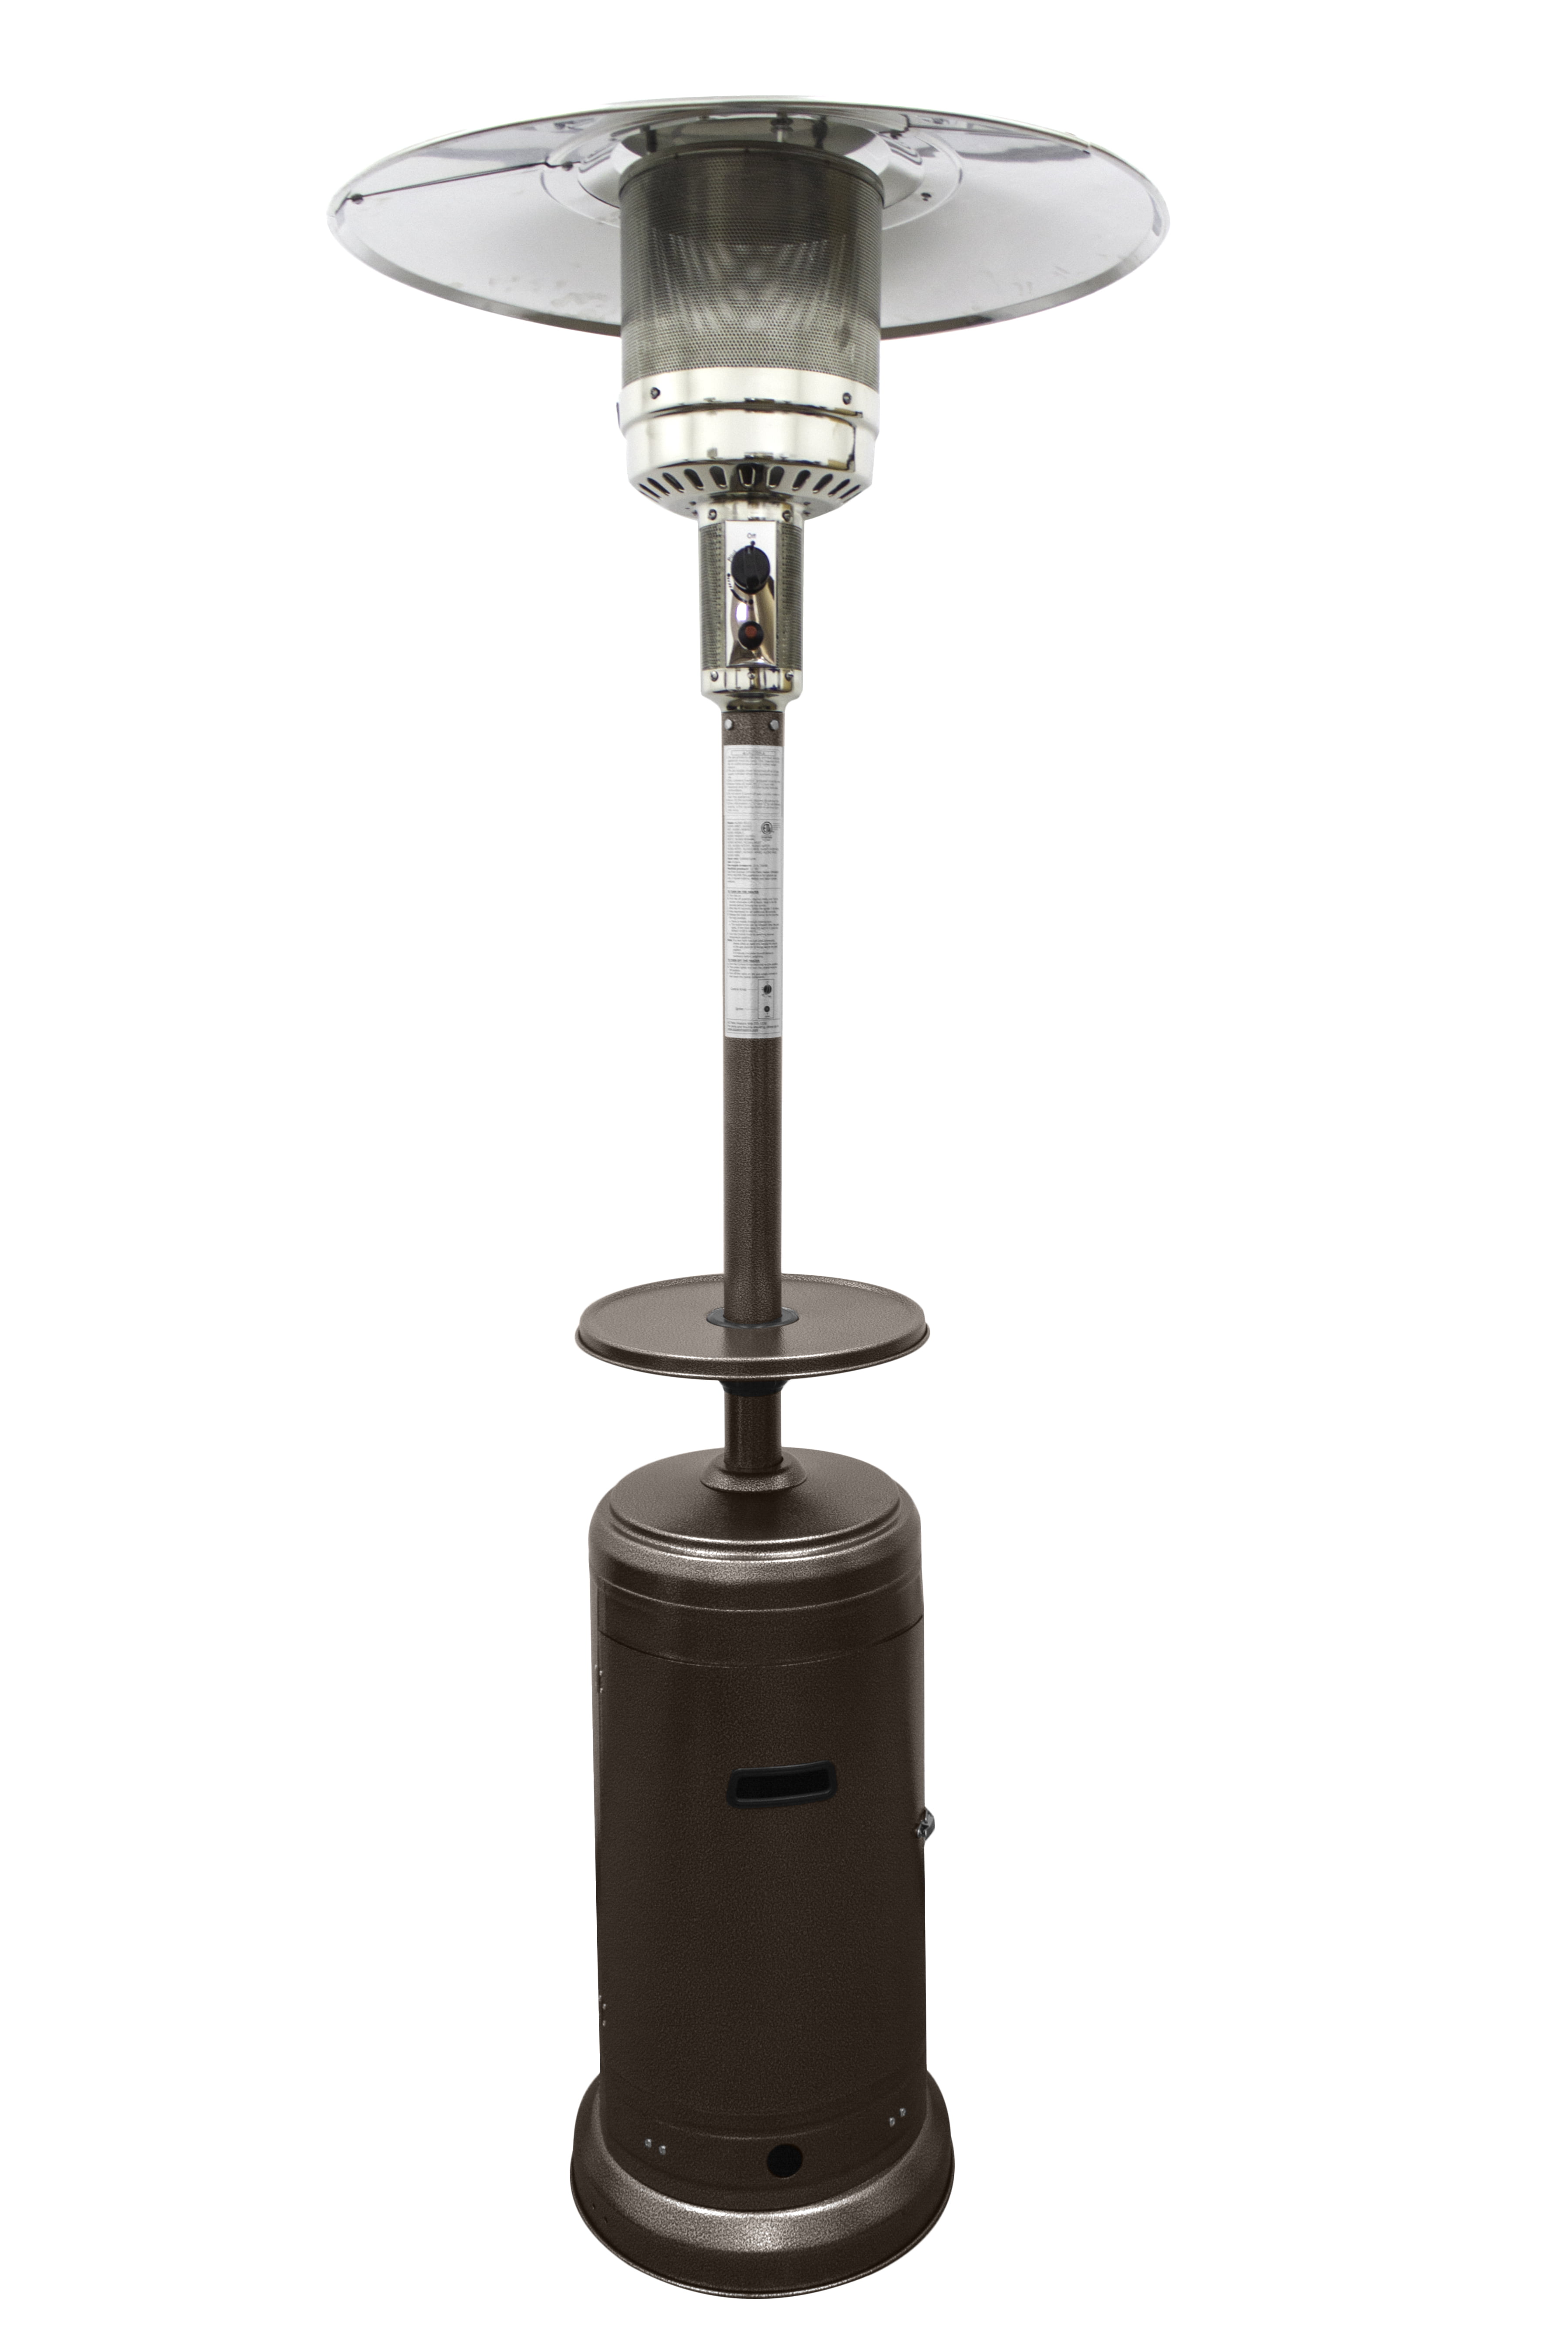 46000 BTU Commercial Propane Outdoor Heater Hammered Bronze Cover Included PAMAPIC Patio Heater